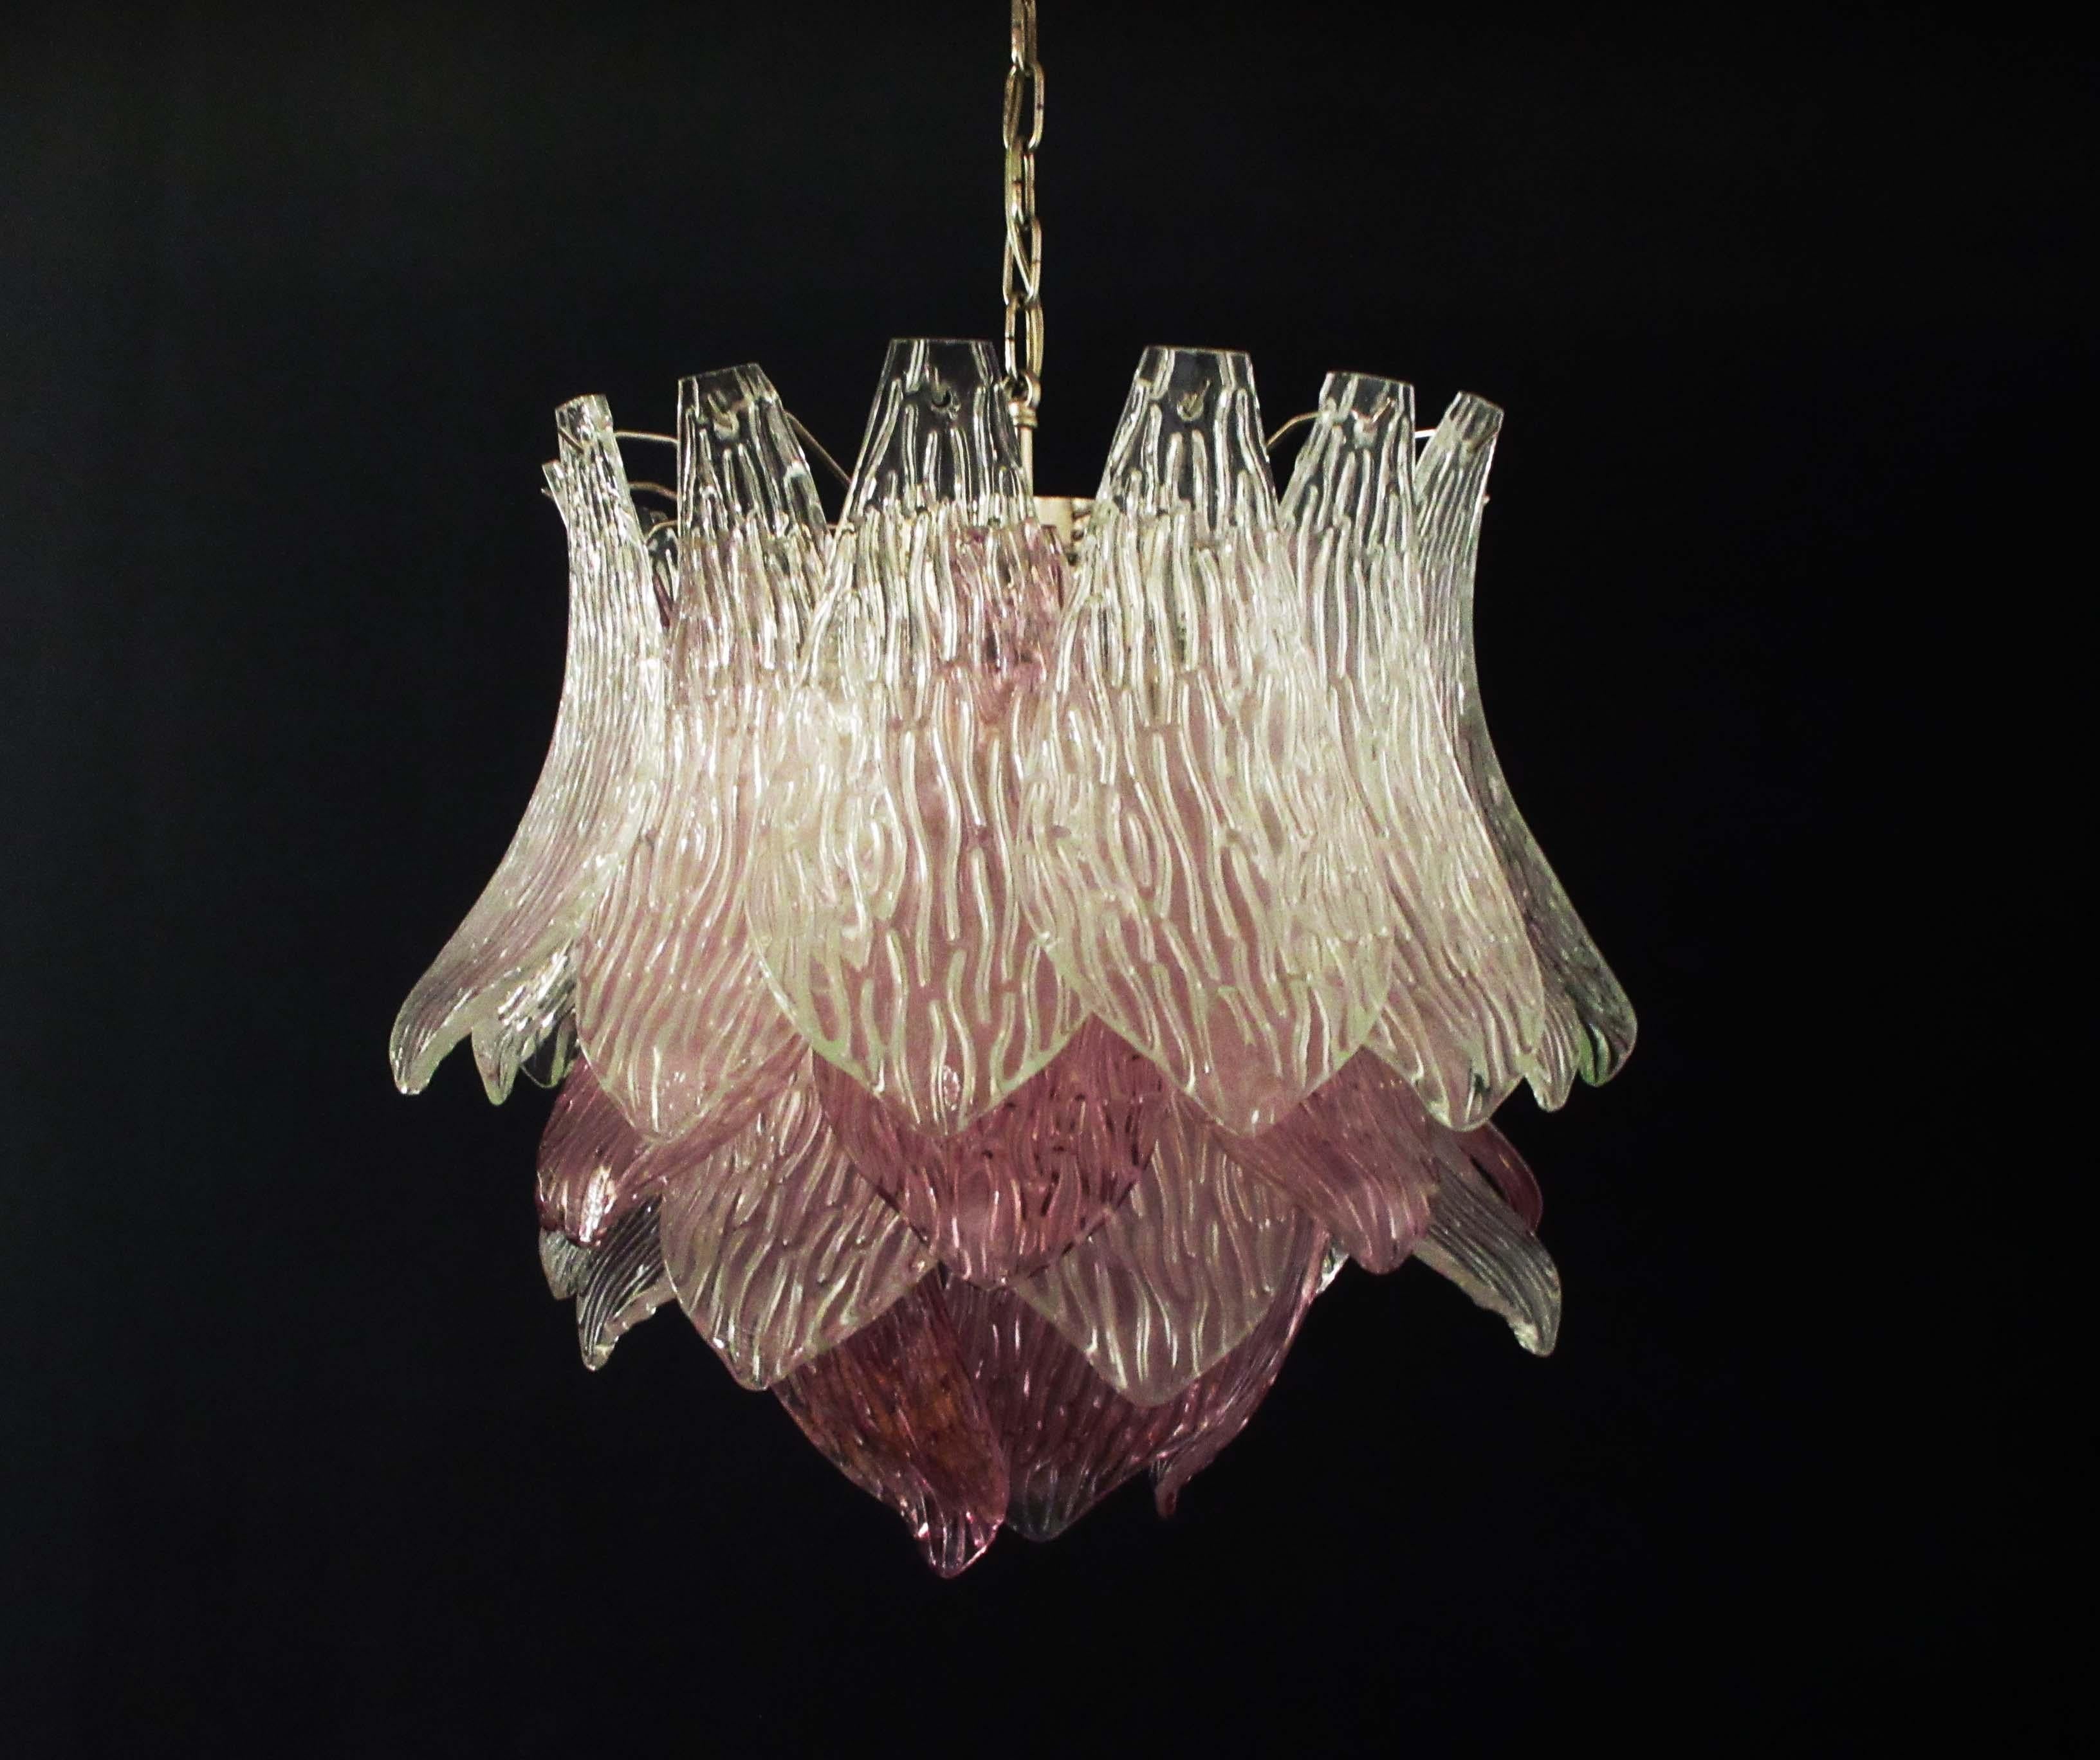 Beautiful and huge Italian Murano chandelier composed of 38 splendid transparent and amethyst glasses that give a very elegant look. The glasses of this chandelier are real works of art. This chandelier is shaped like a blossoming flower.
Period: